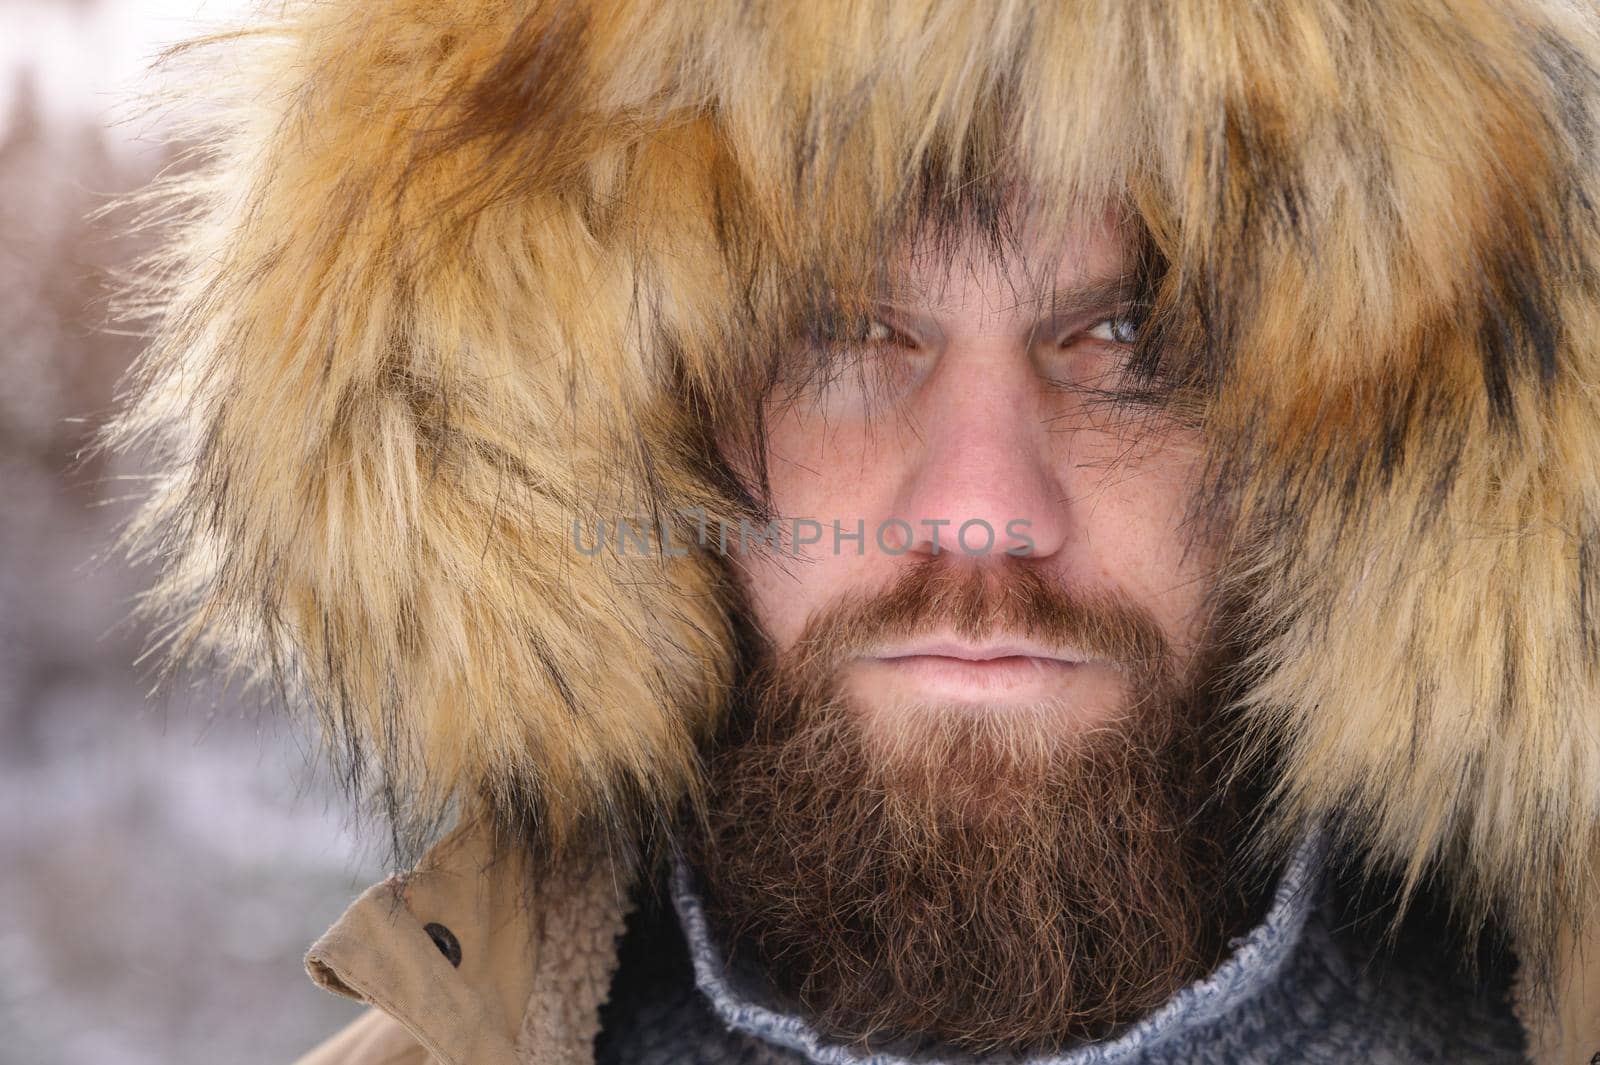 A man dressed in a hooded casual jacket jacket outerwear stern from under the hood a serious portrait of a person in the winter forest. Outdoor time and winter equipment concept image.